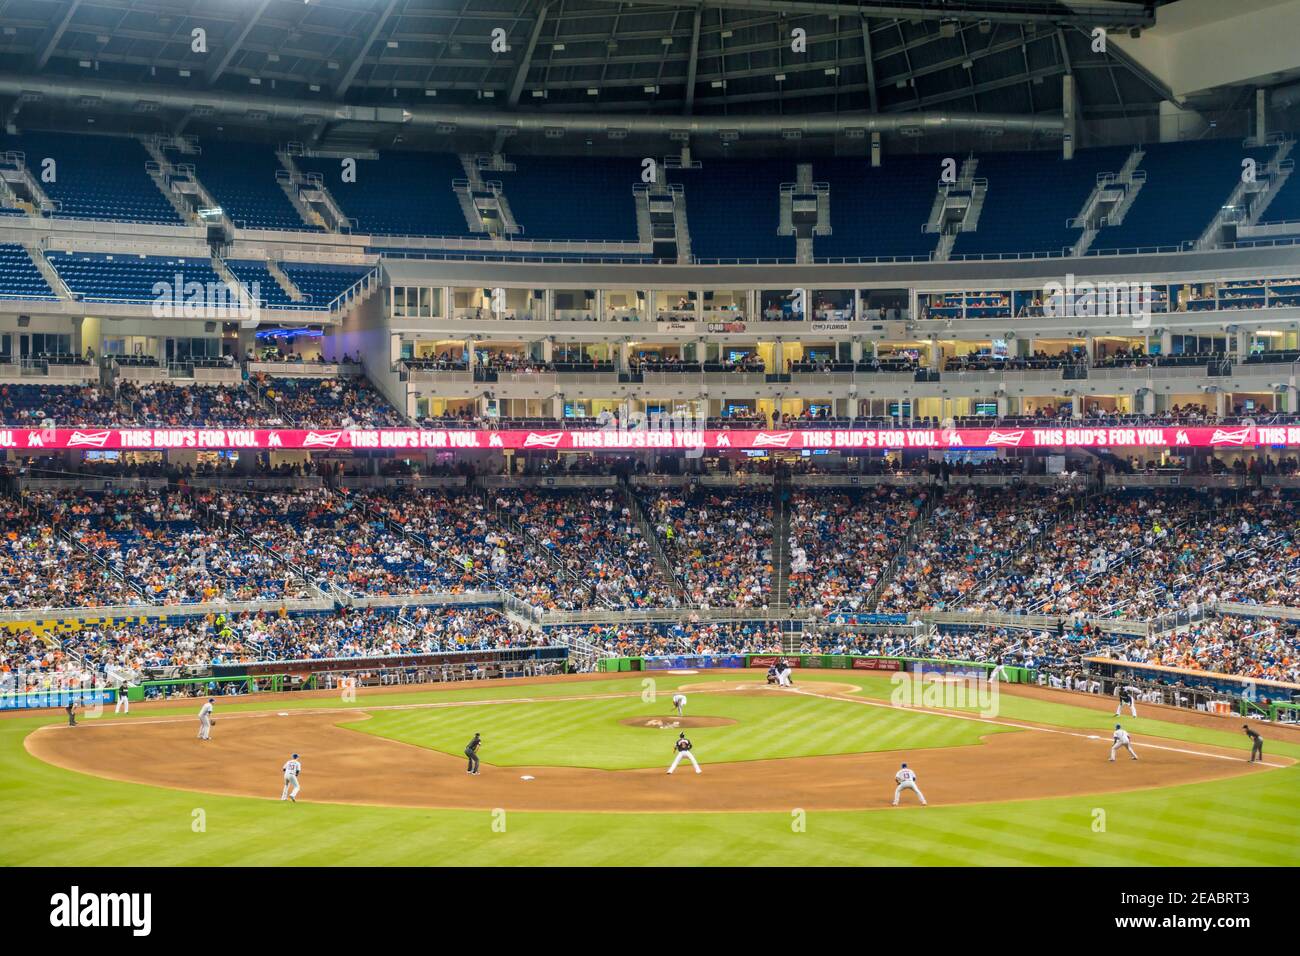 The Marlins play the Mets at Miami's Marlin Park. Stock Photo